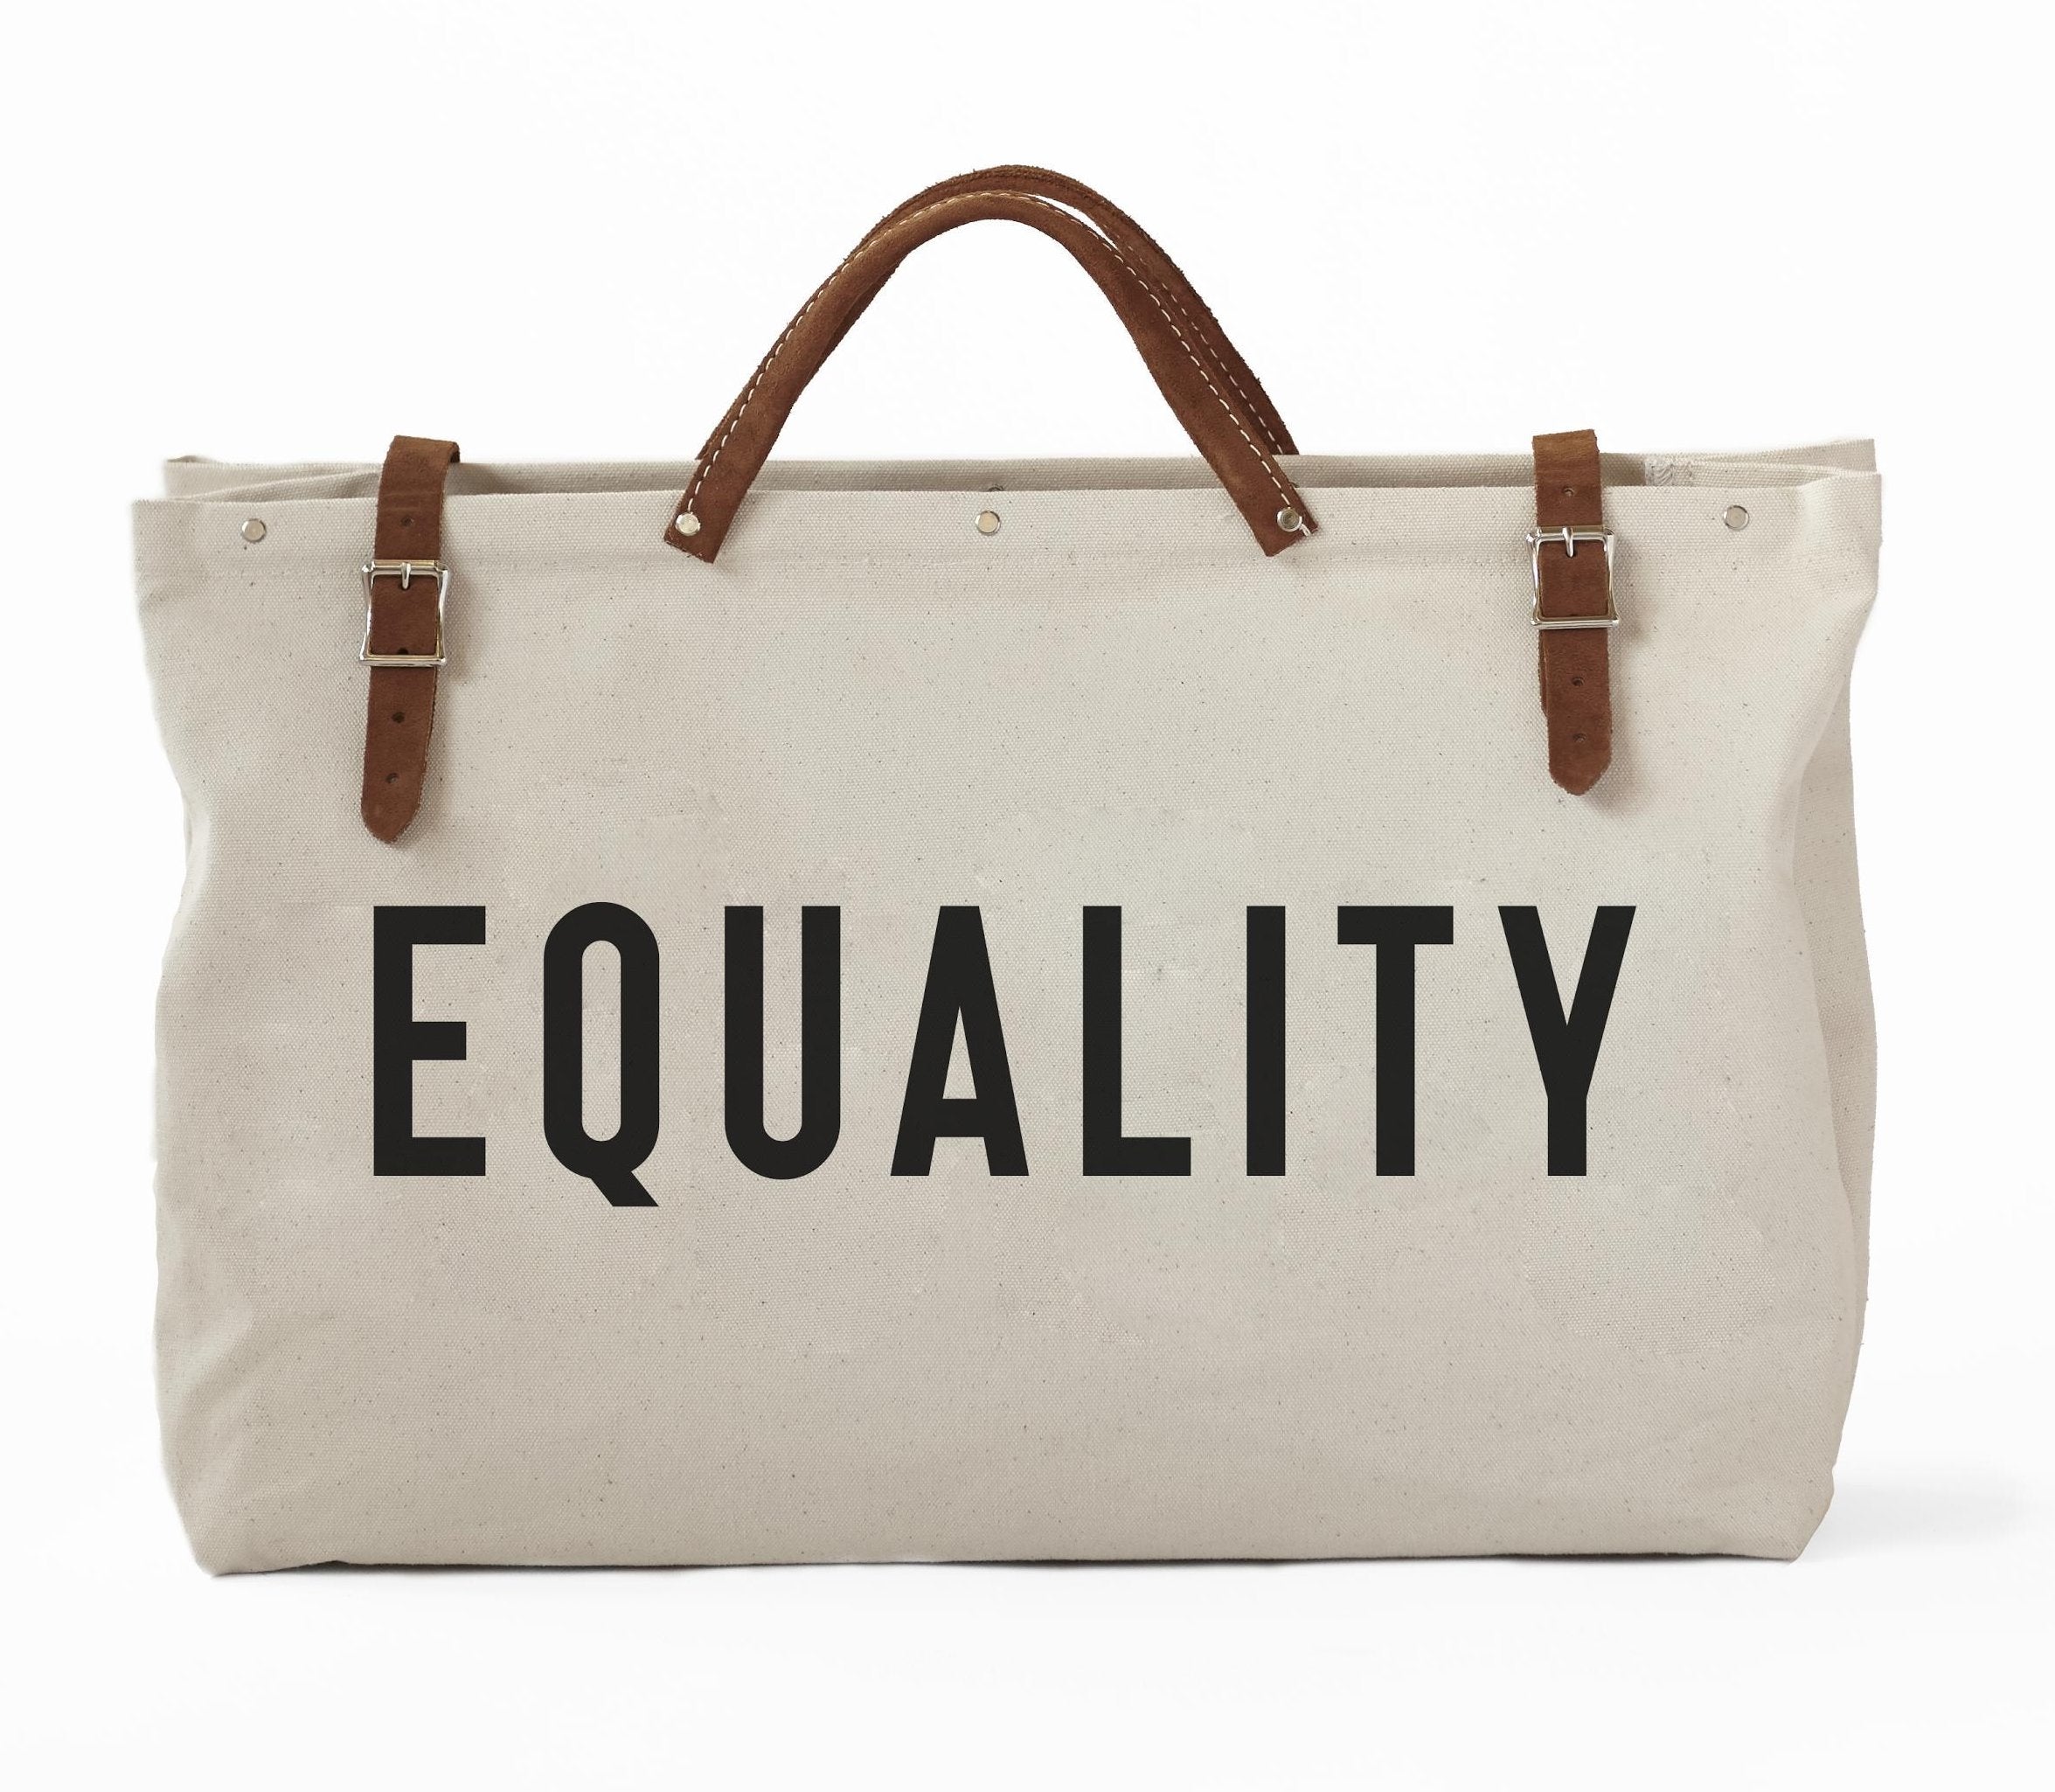 It' bags all about exclusivity